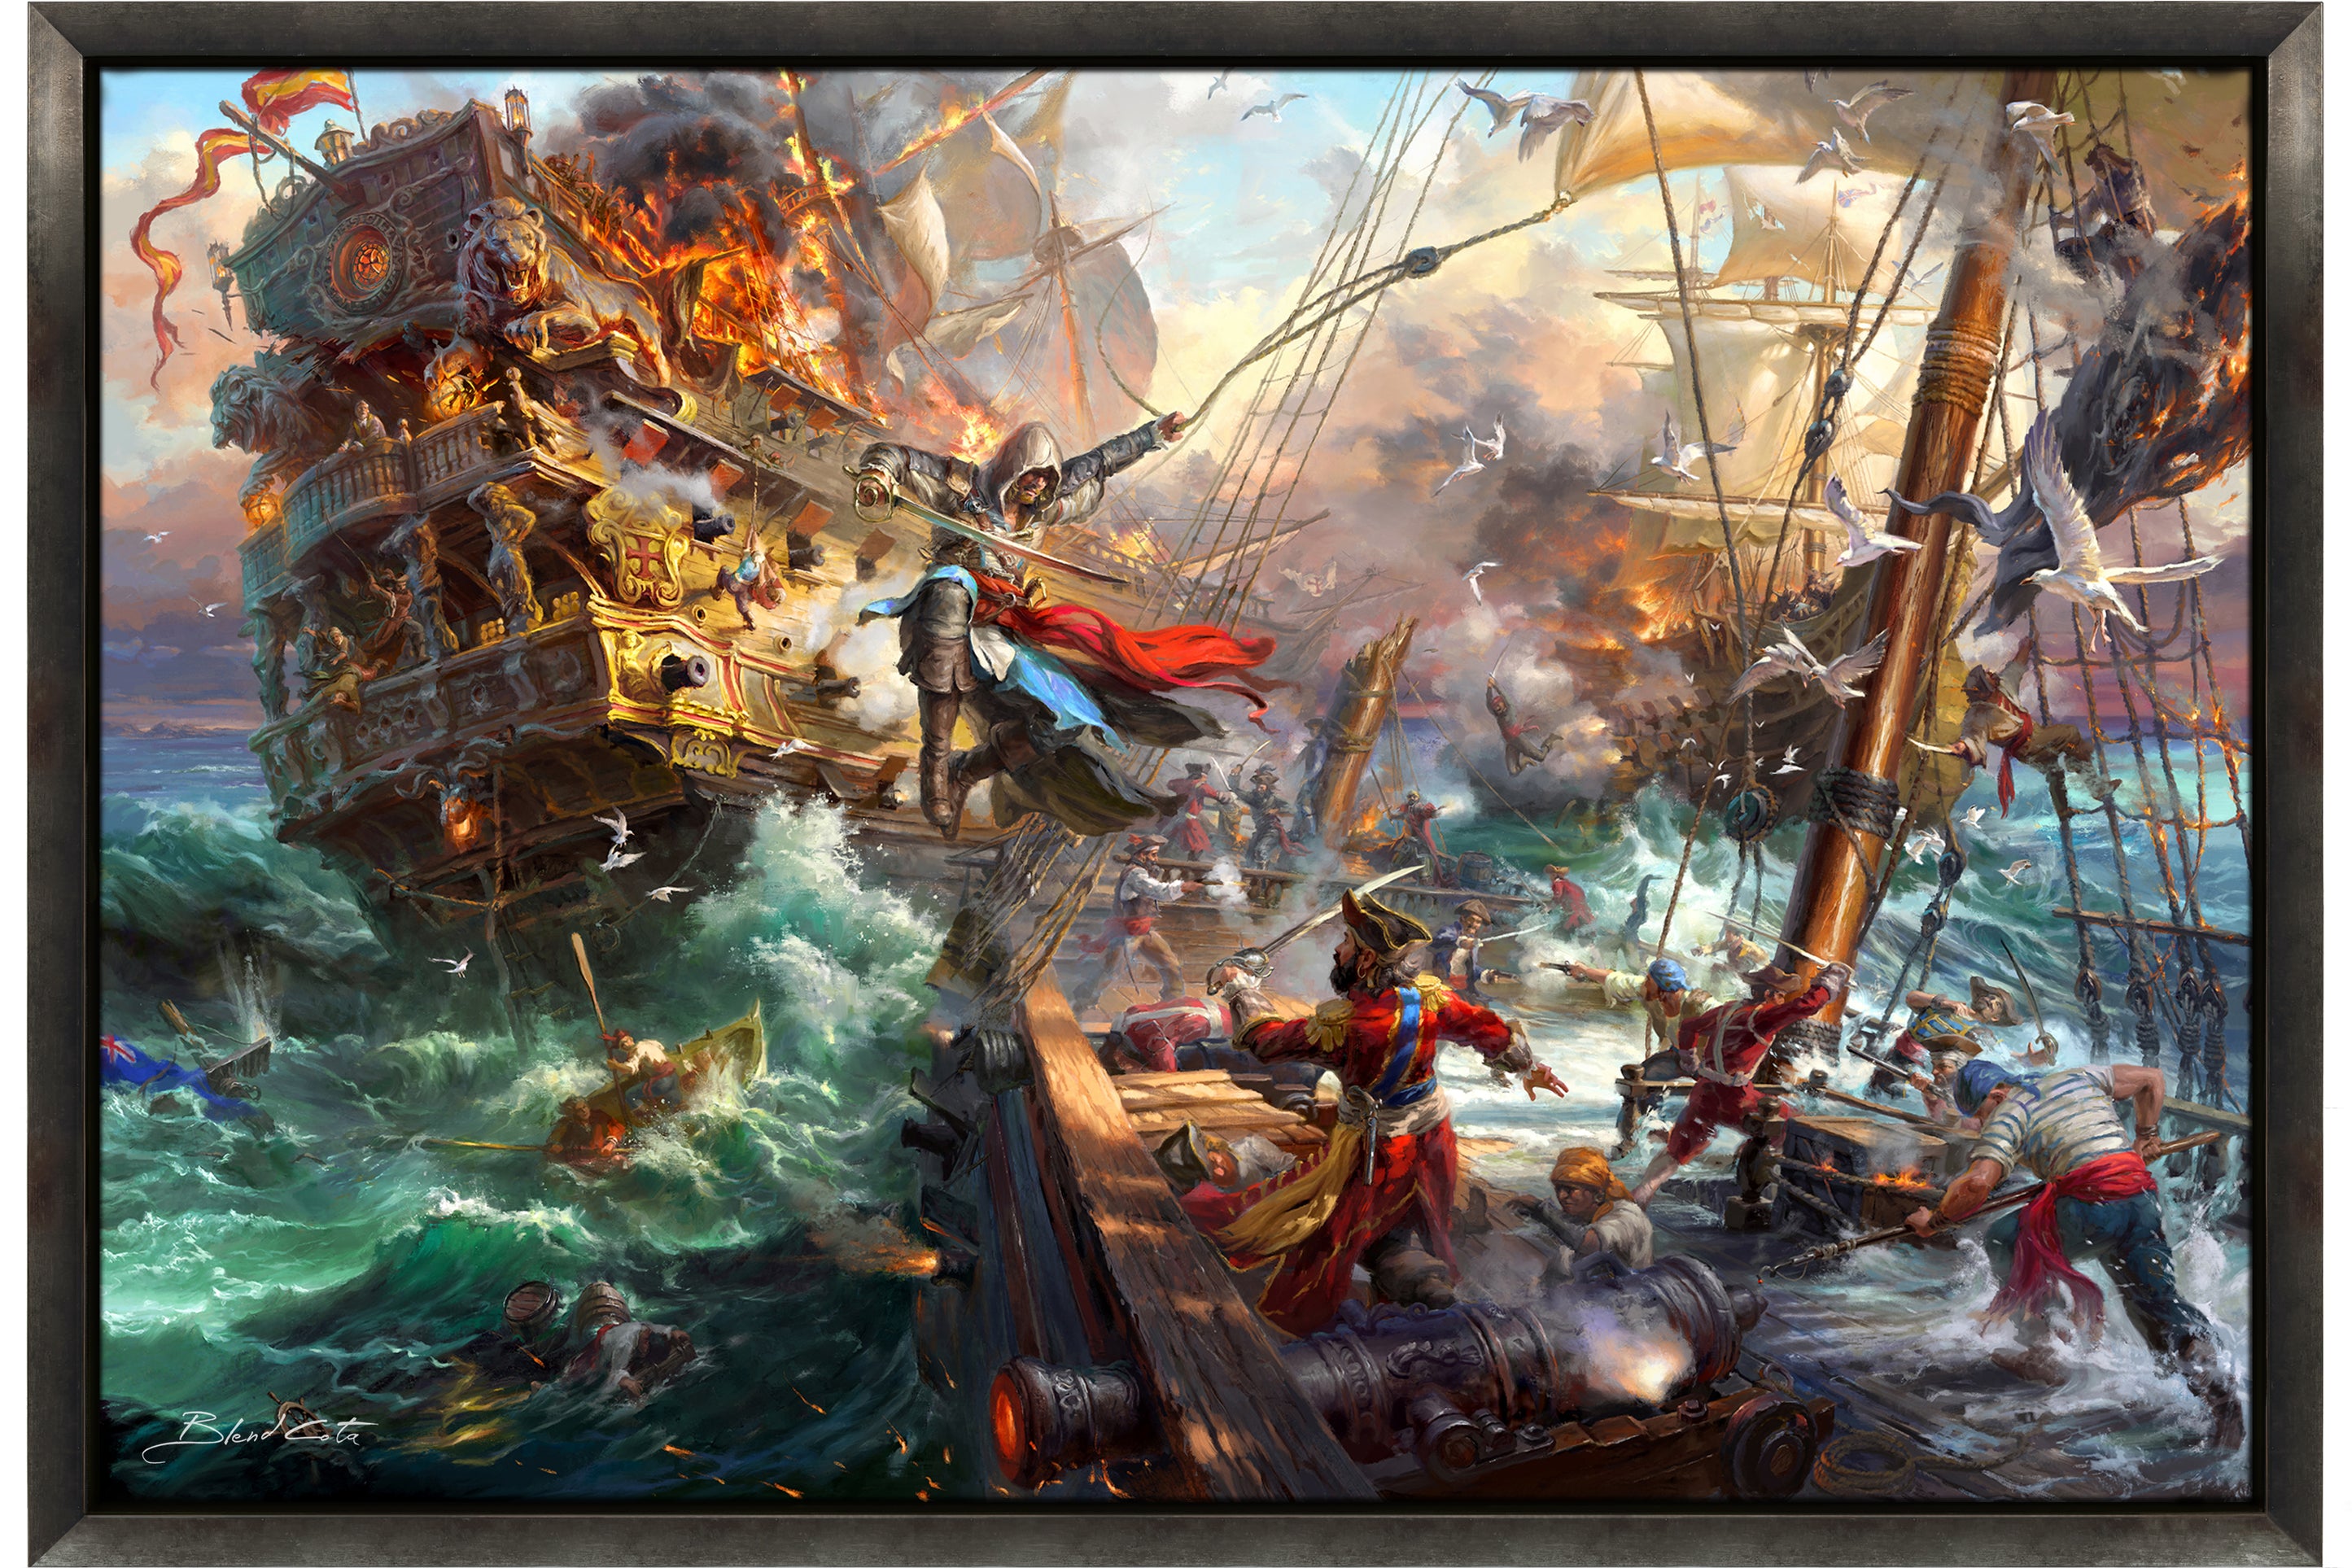 Framed original oil on canvas painting of Assassin's Creed Black Flag and Edward Kenway meticulously designed and painted with intricate details in a realistic style.